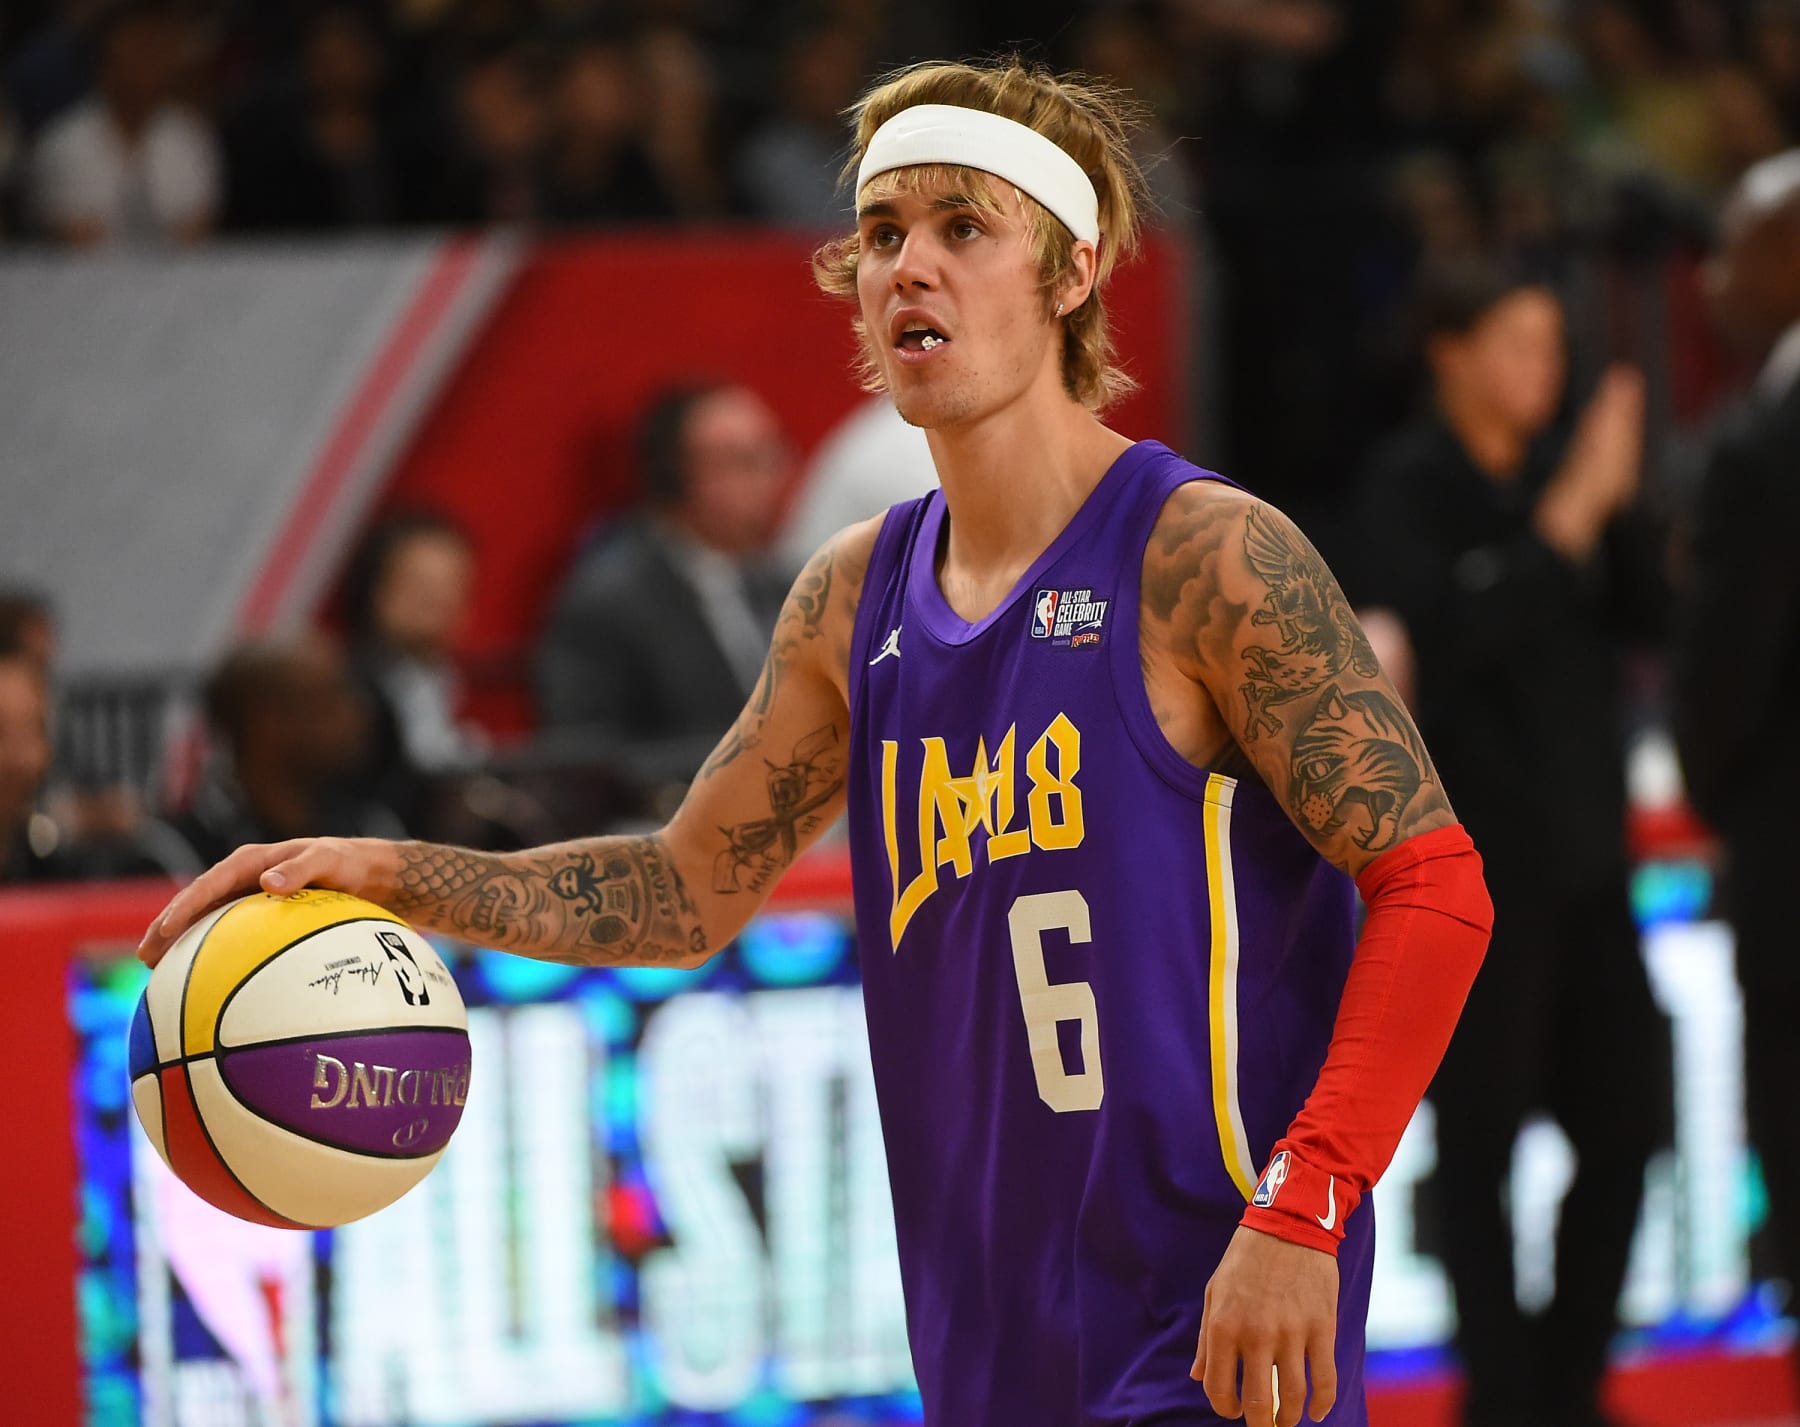 Justin Bieber Impresses With Basketball Skills At L.A. Game